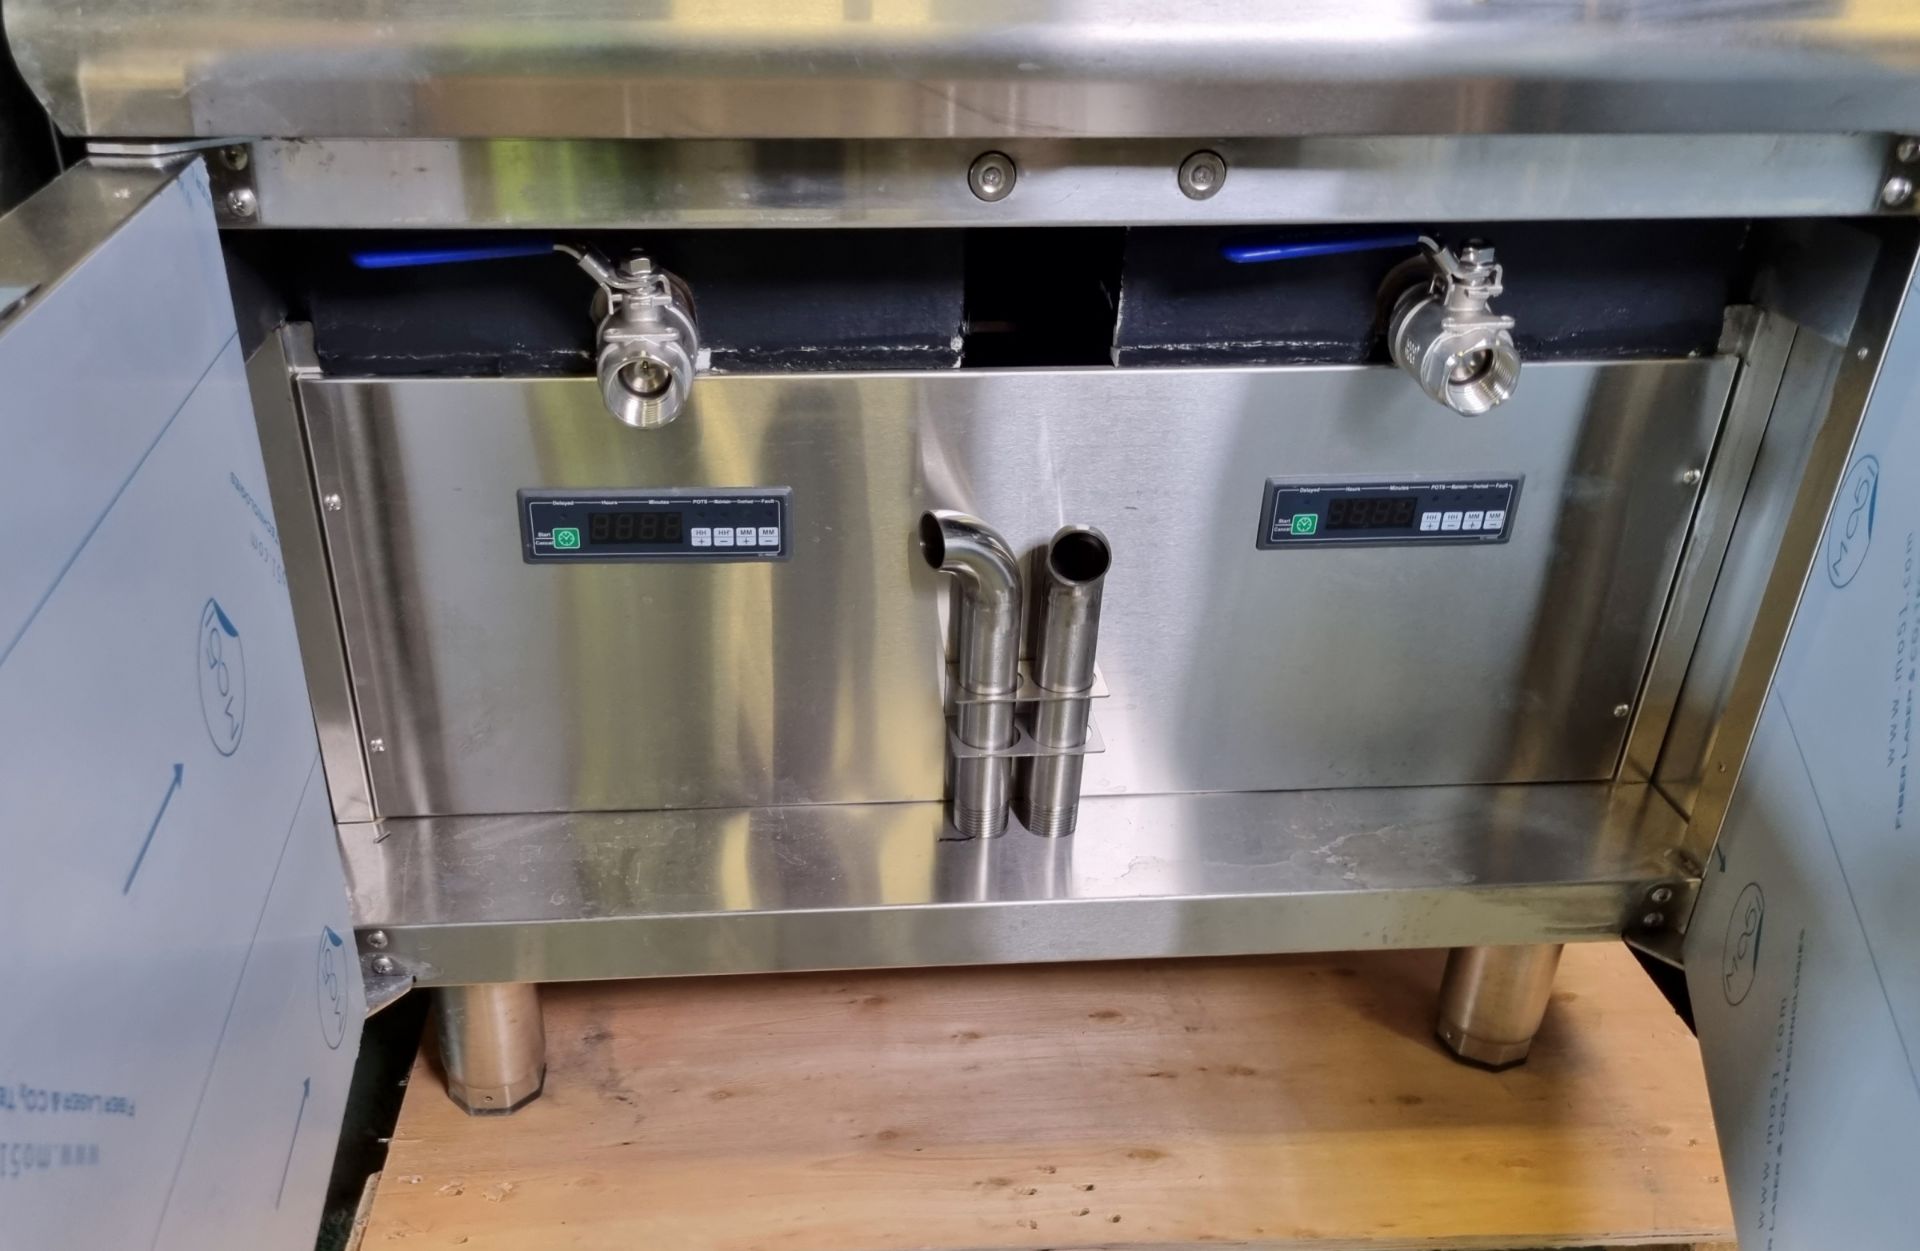 Rexmartins RESC-8B-16 free standing electric induction fryer - double tank with baskets - W 800 - Image 4 of 4